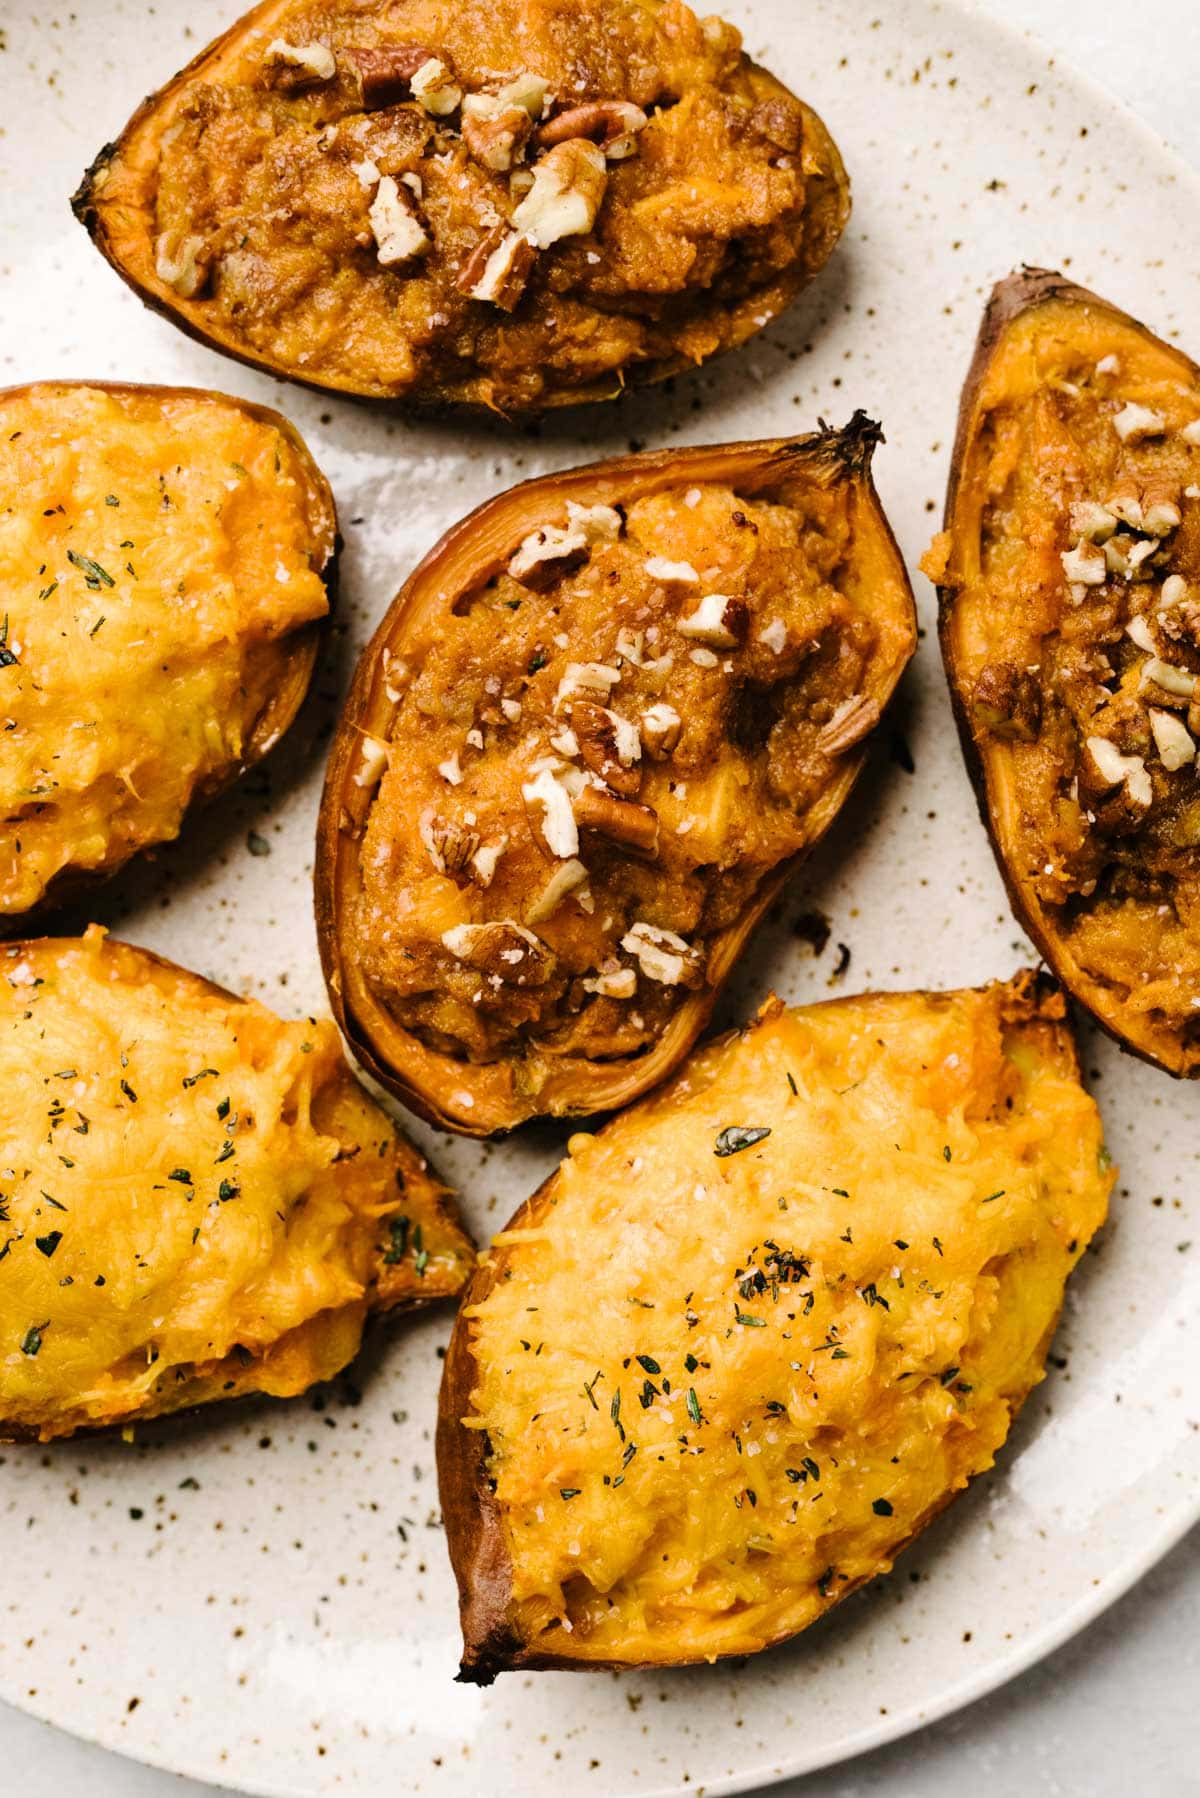 Two variations of twice baked sweet potatoes, one savory and one sweet, on a cream speckled plate.